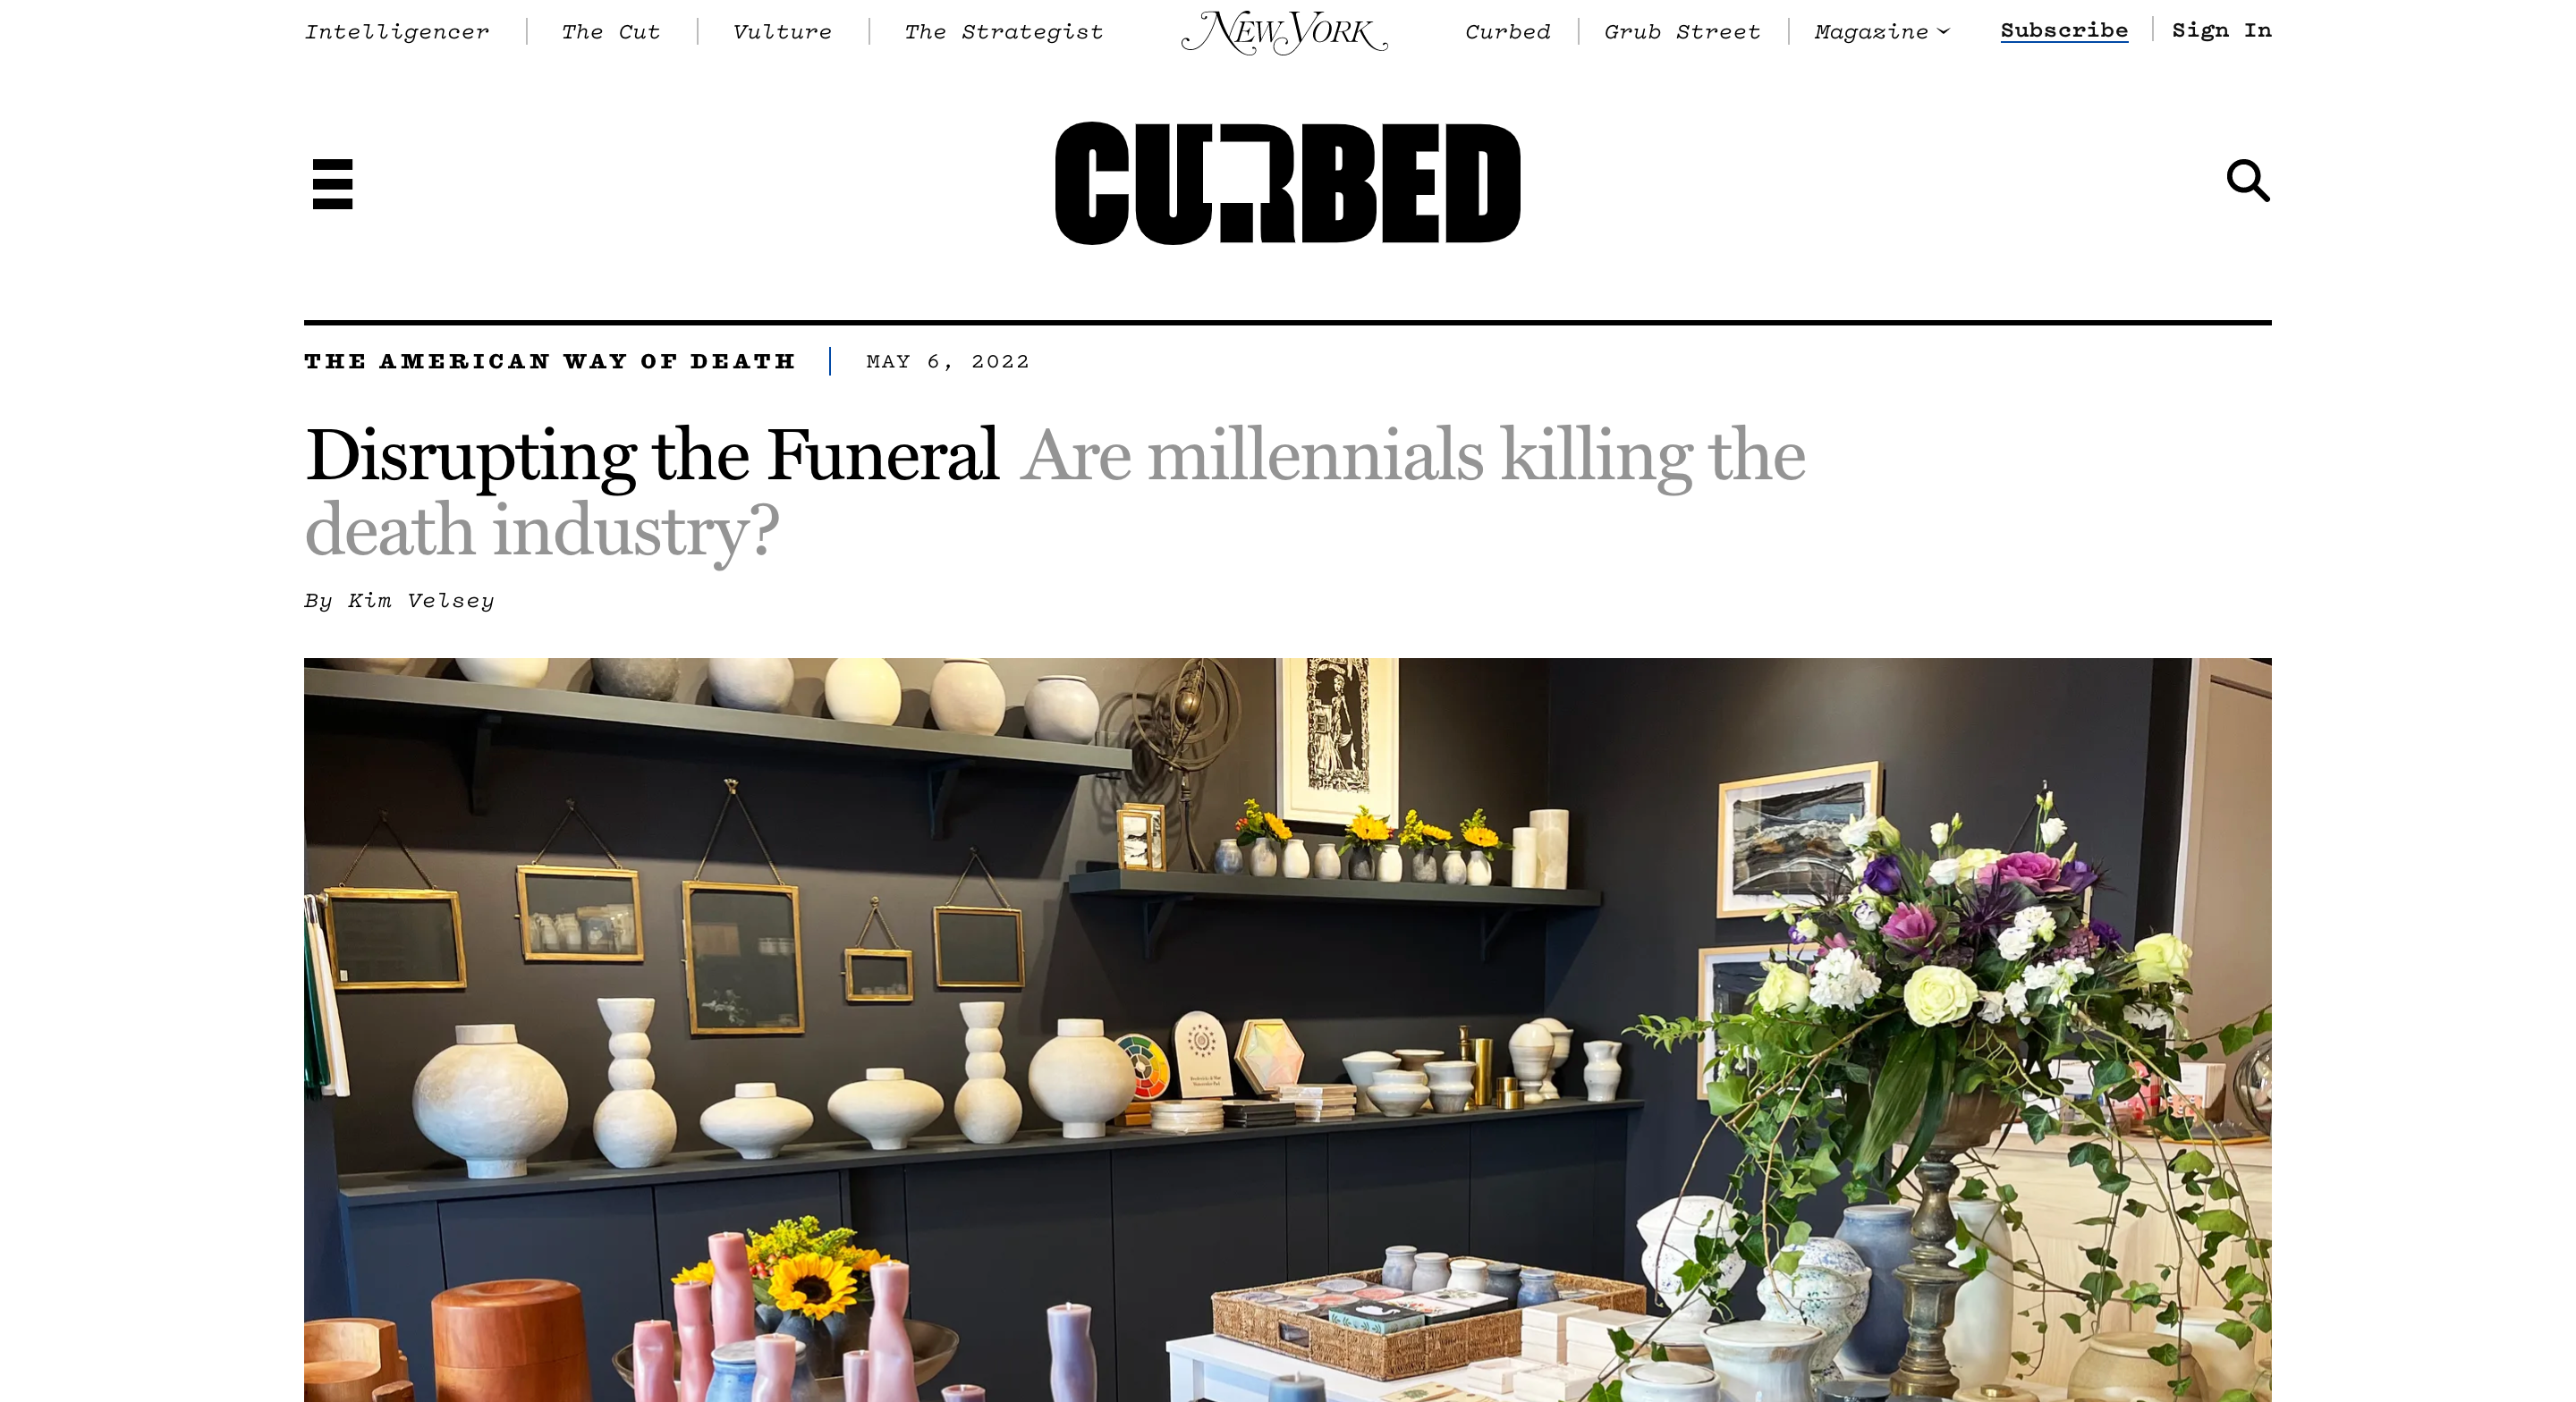 CURBED - Disrupting the Funeral Are millennials killing the death industry?